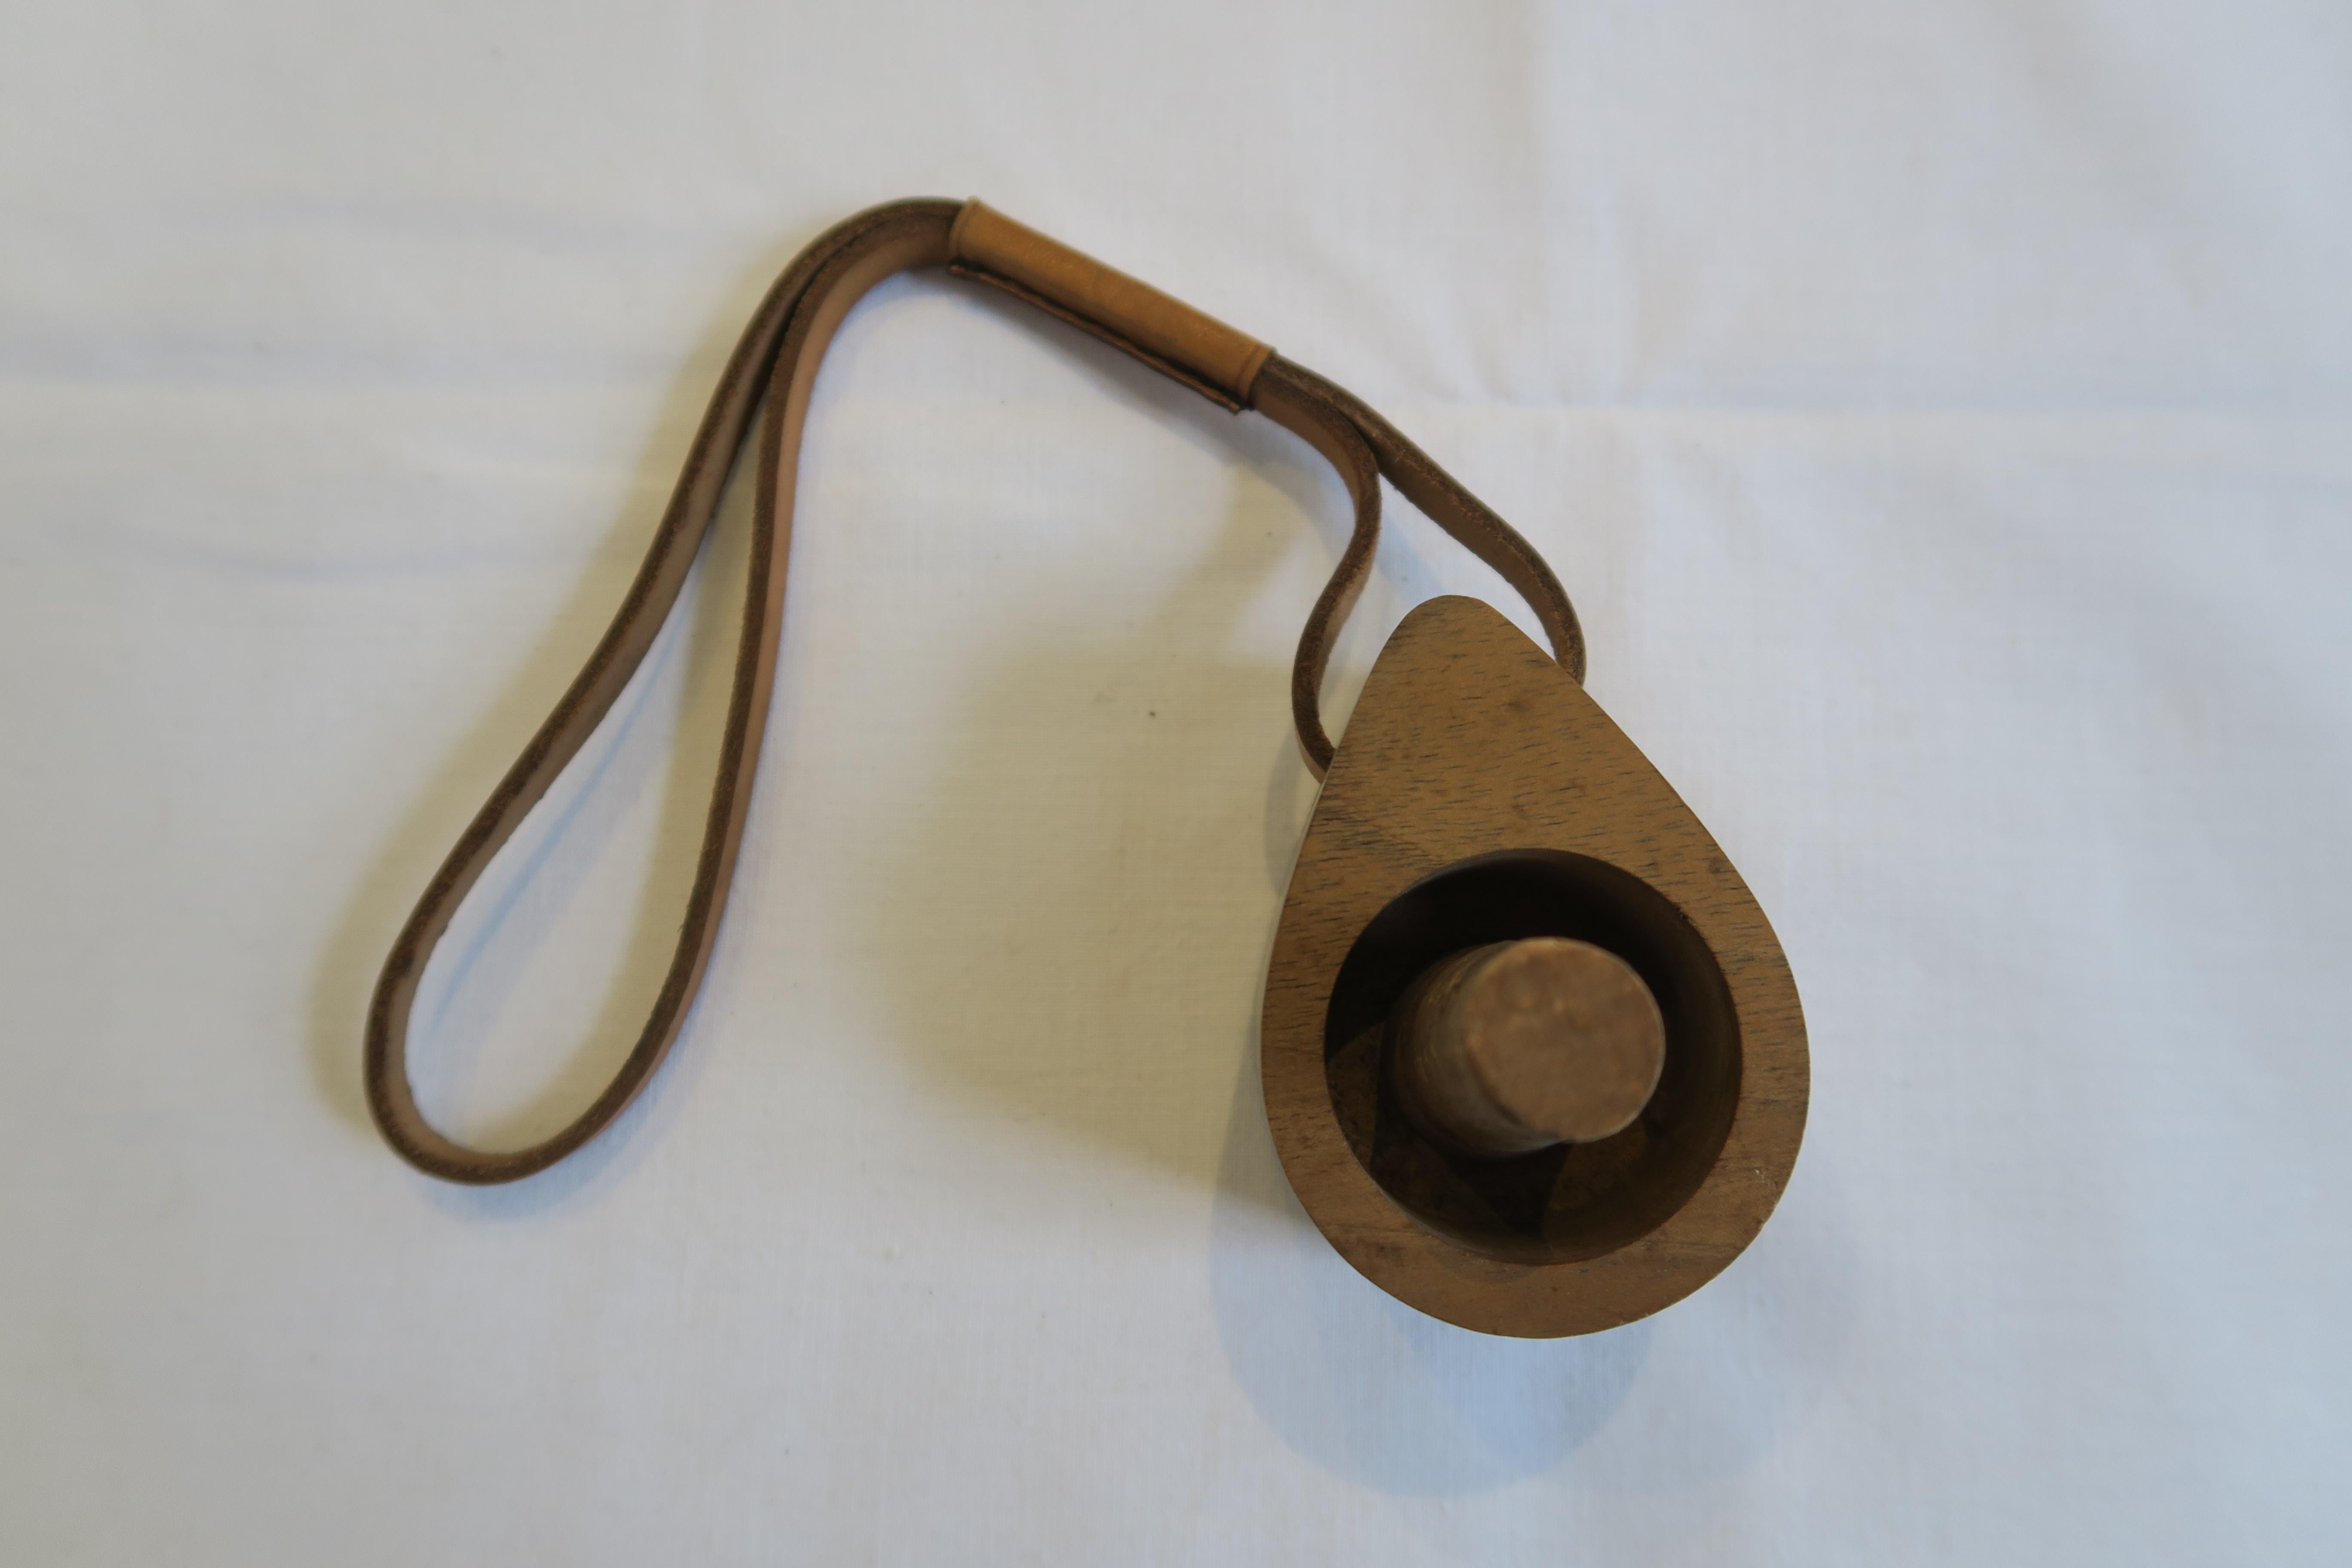 The item on sale is an original Carl Auböck bottle stopper. It was hand crafted and is made from the finest wood and cork. It has a robust leather strap that was hand sewn (details in pictures). This unique example of Austrian Mid-Century design and